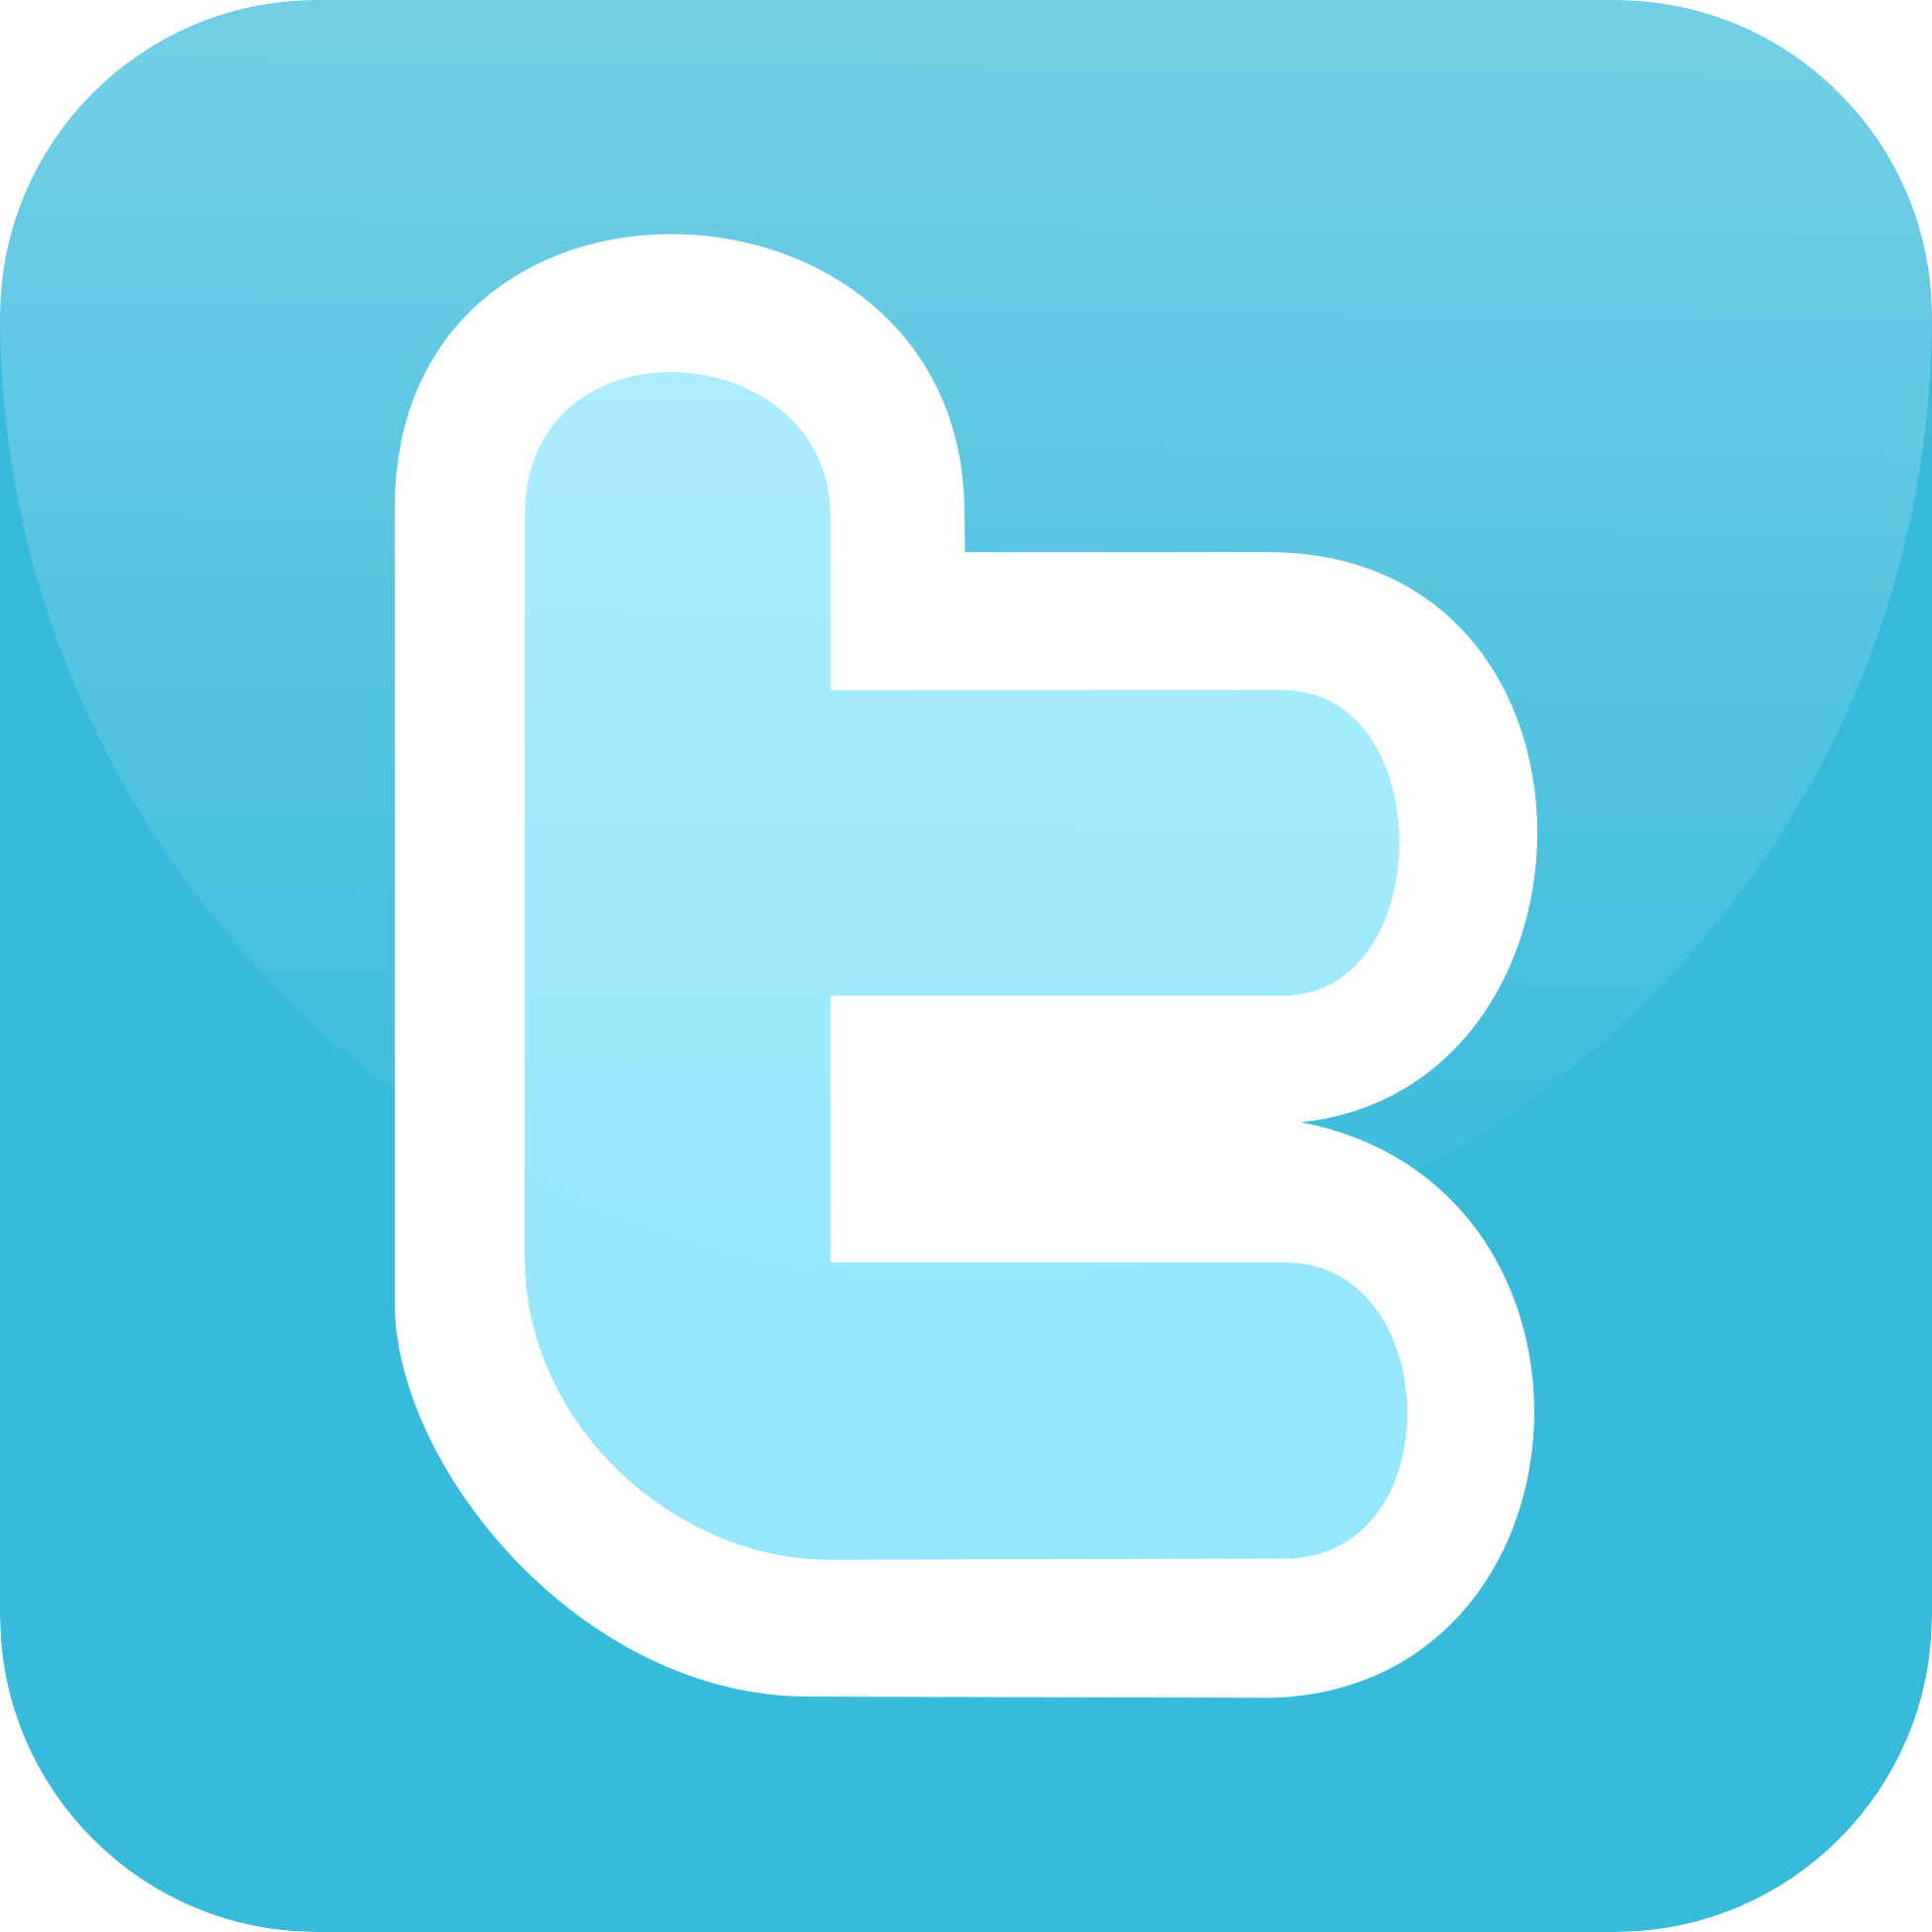 Twitter Png Free Download - Twitter, Transparent background PNG HD thumbnail